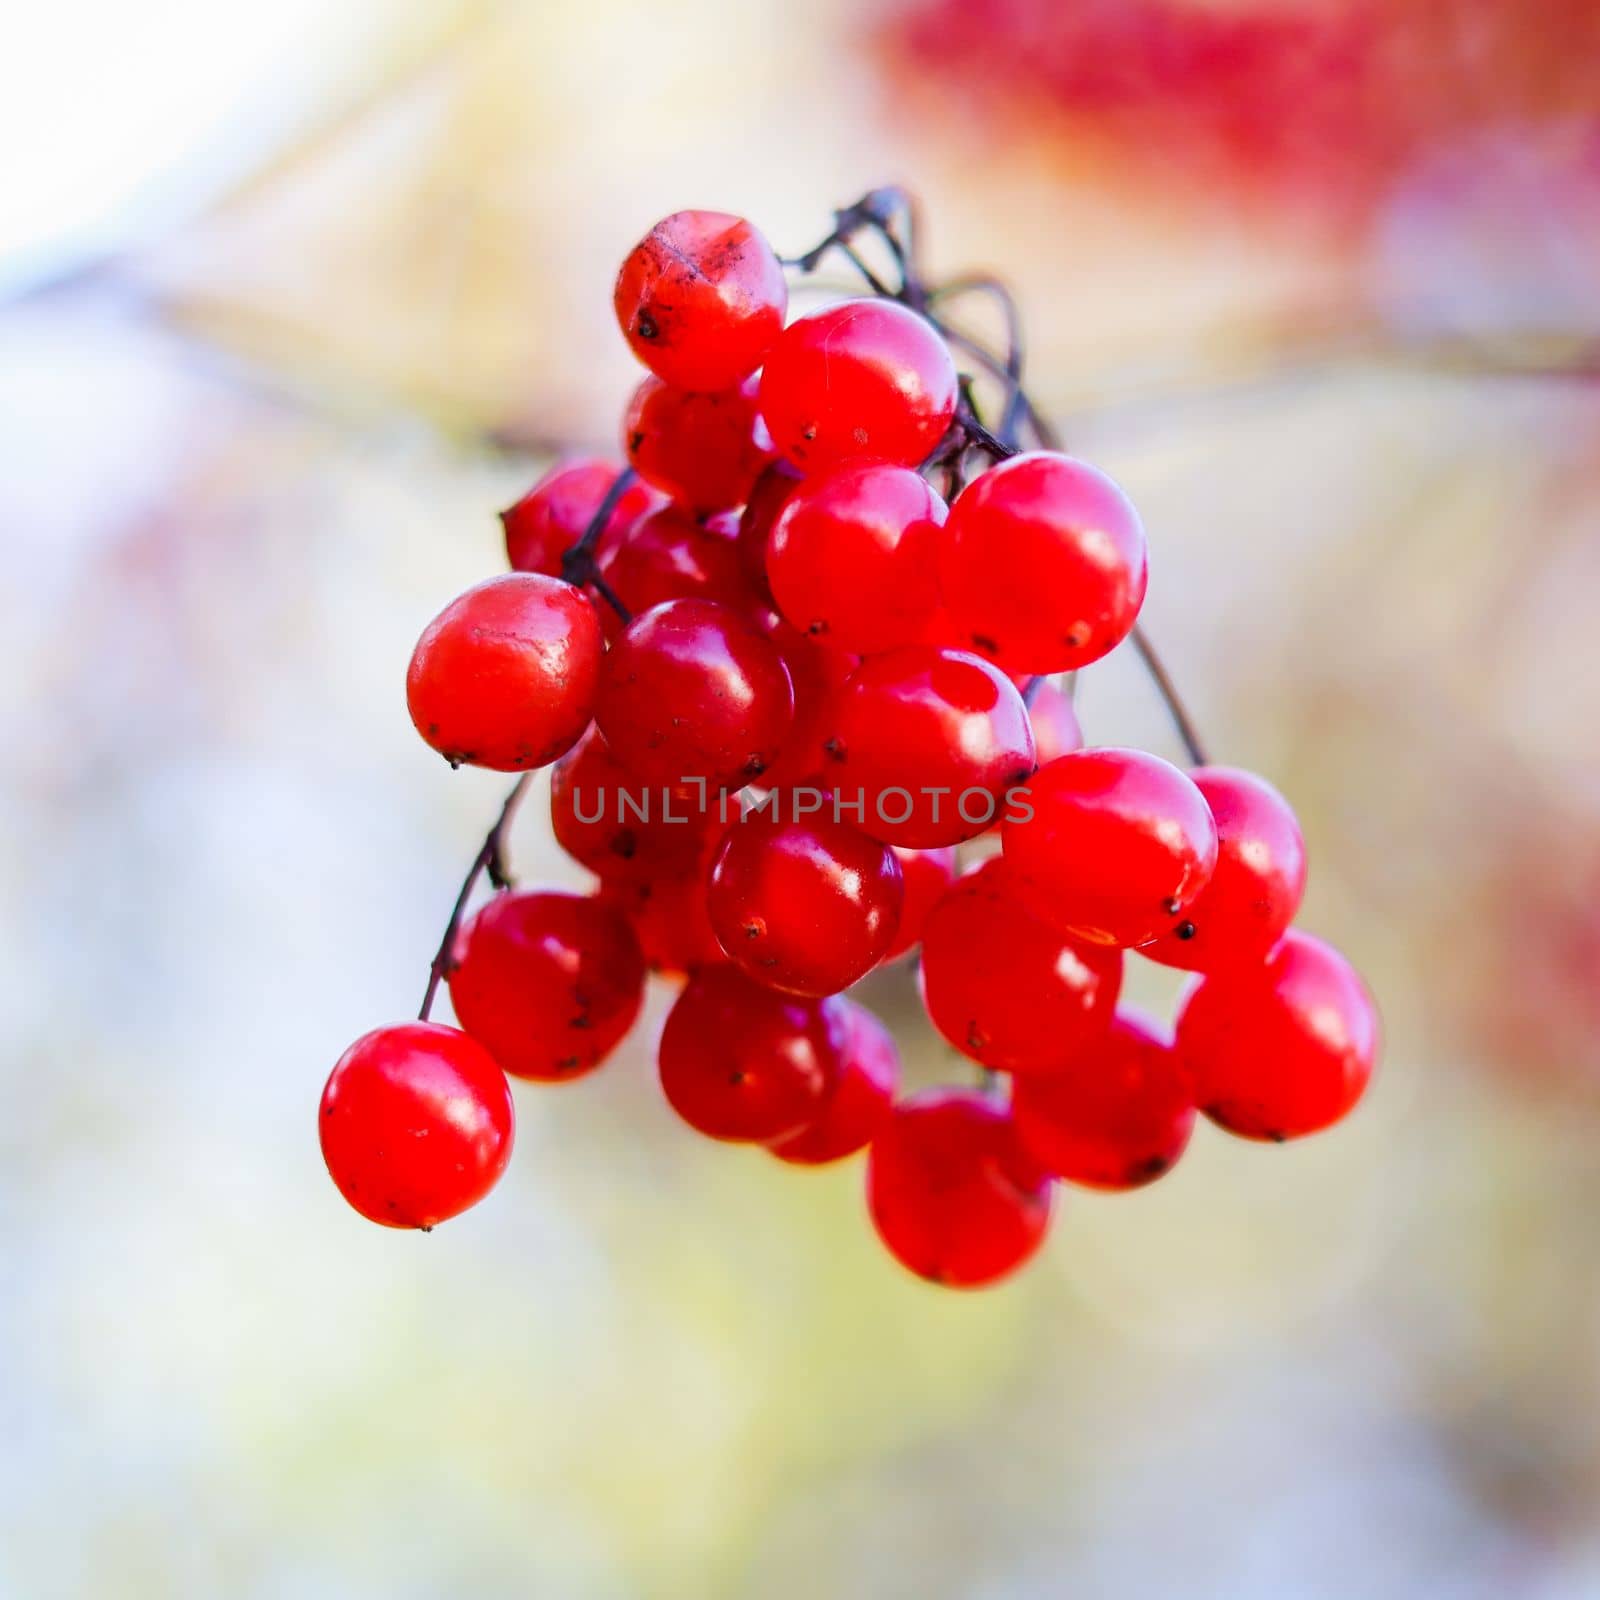 Red viburnum berries on the branches of a bush in the garden. Blurred autumn background